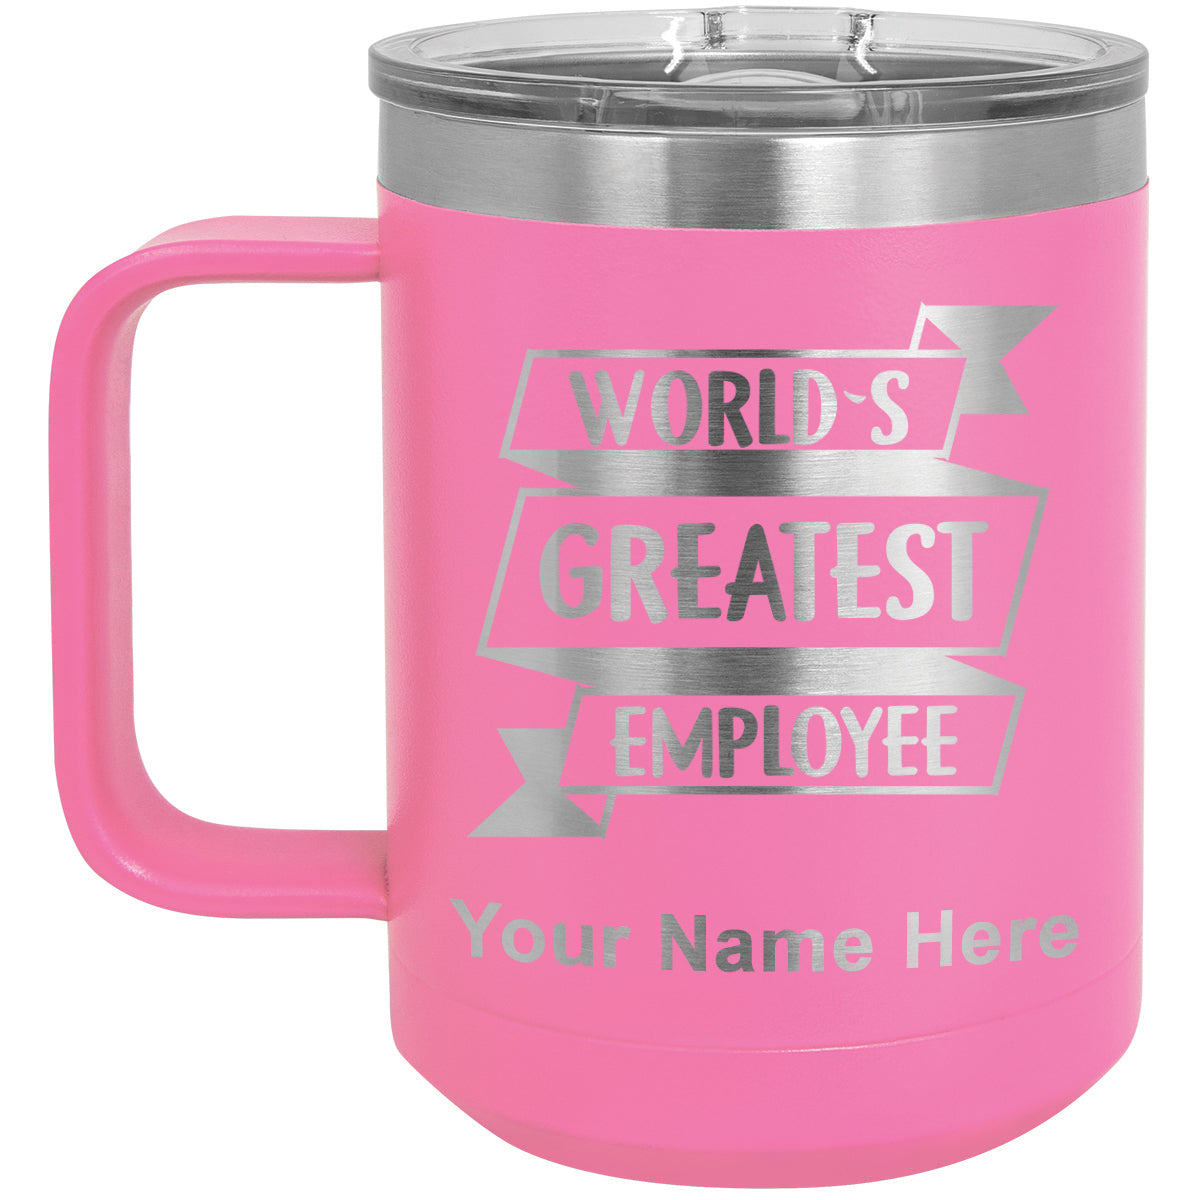 15oz Vacuum Insulated Coffee Mug, World's Greatest Employee, Personalized Engraving Included